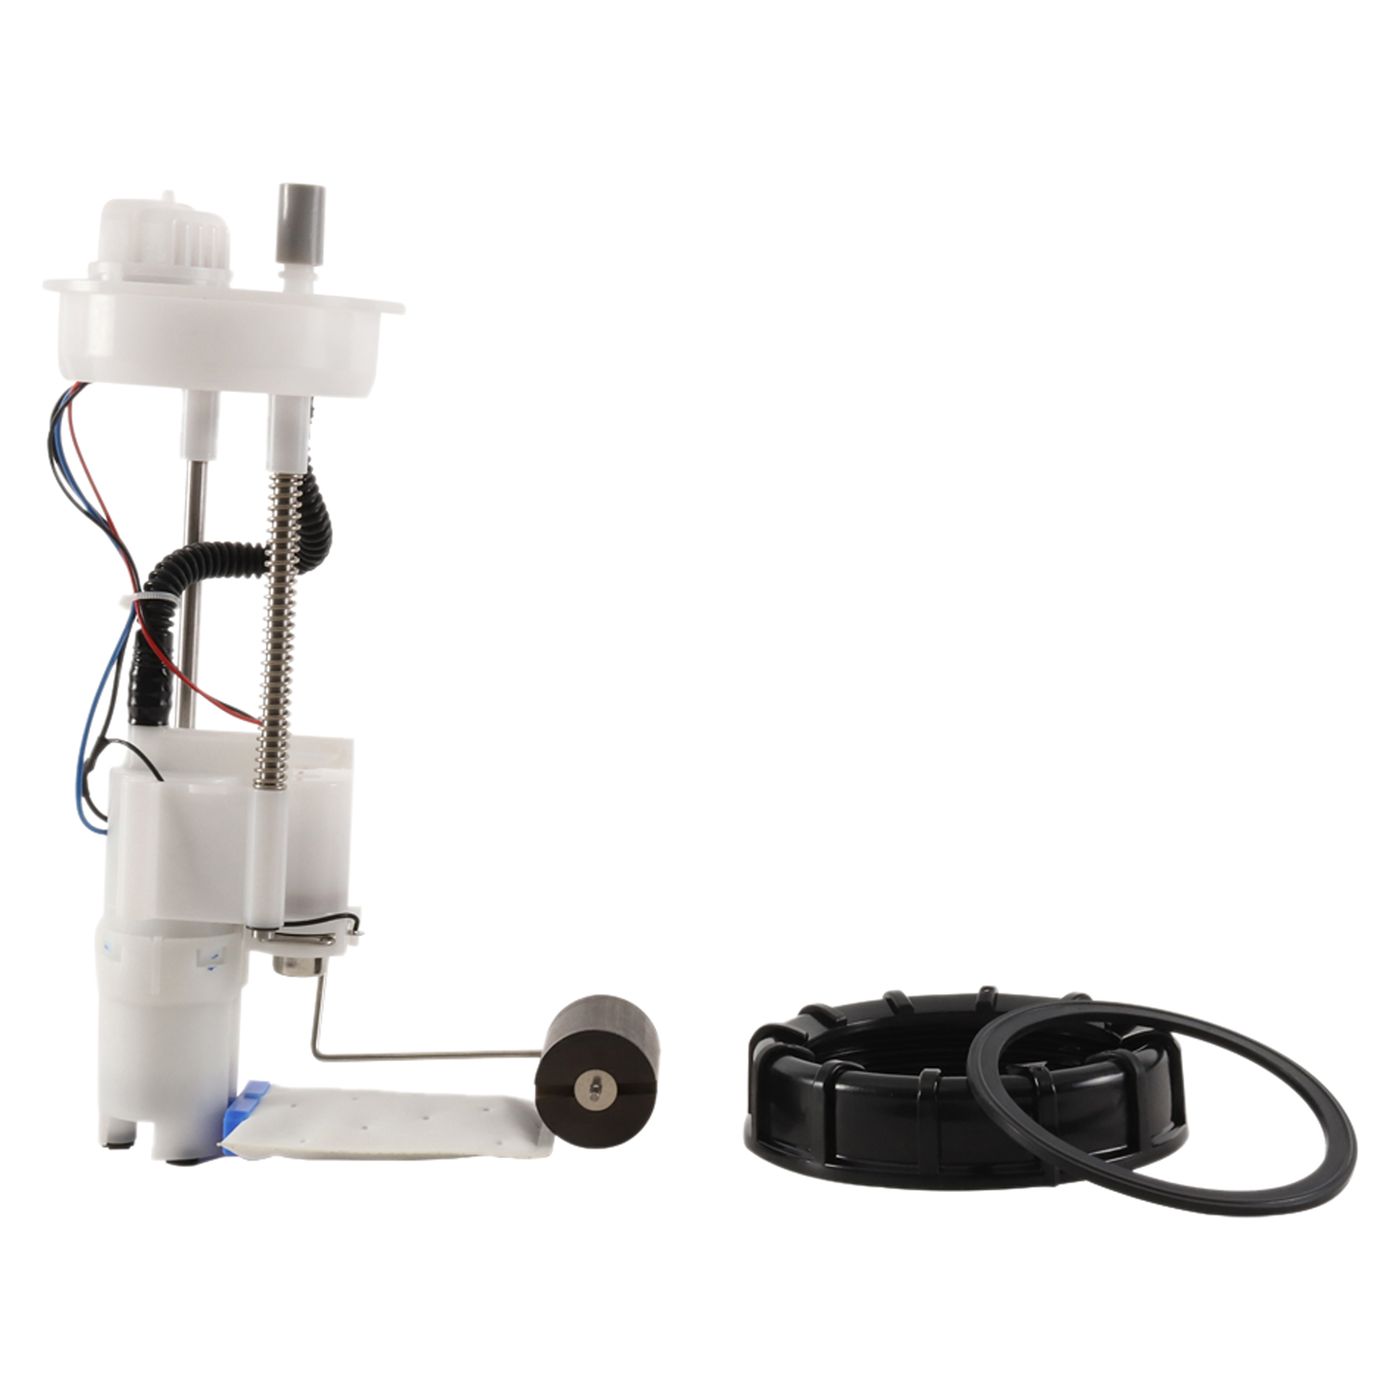 Wrp Fuel Pump Modules - WRP471001 image